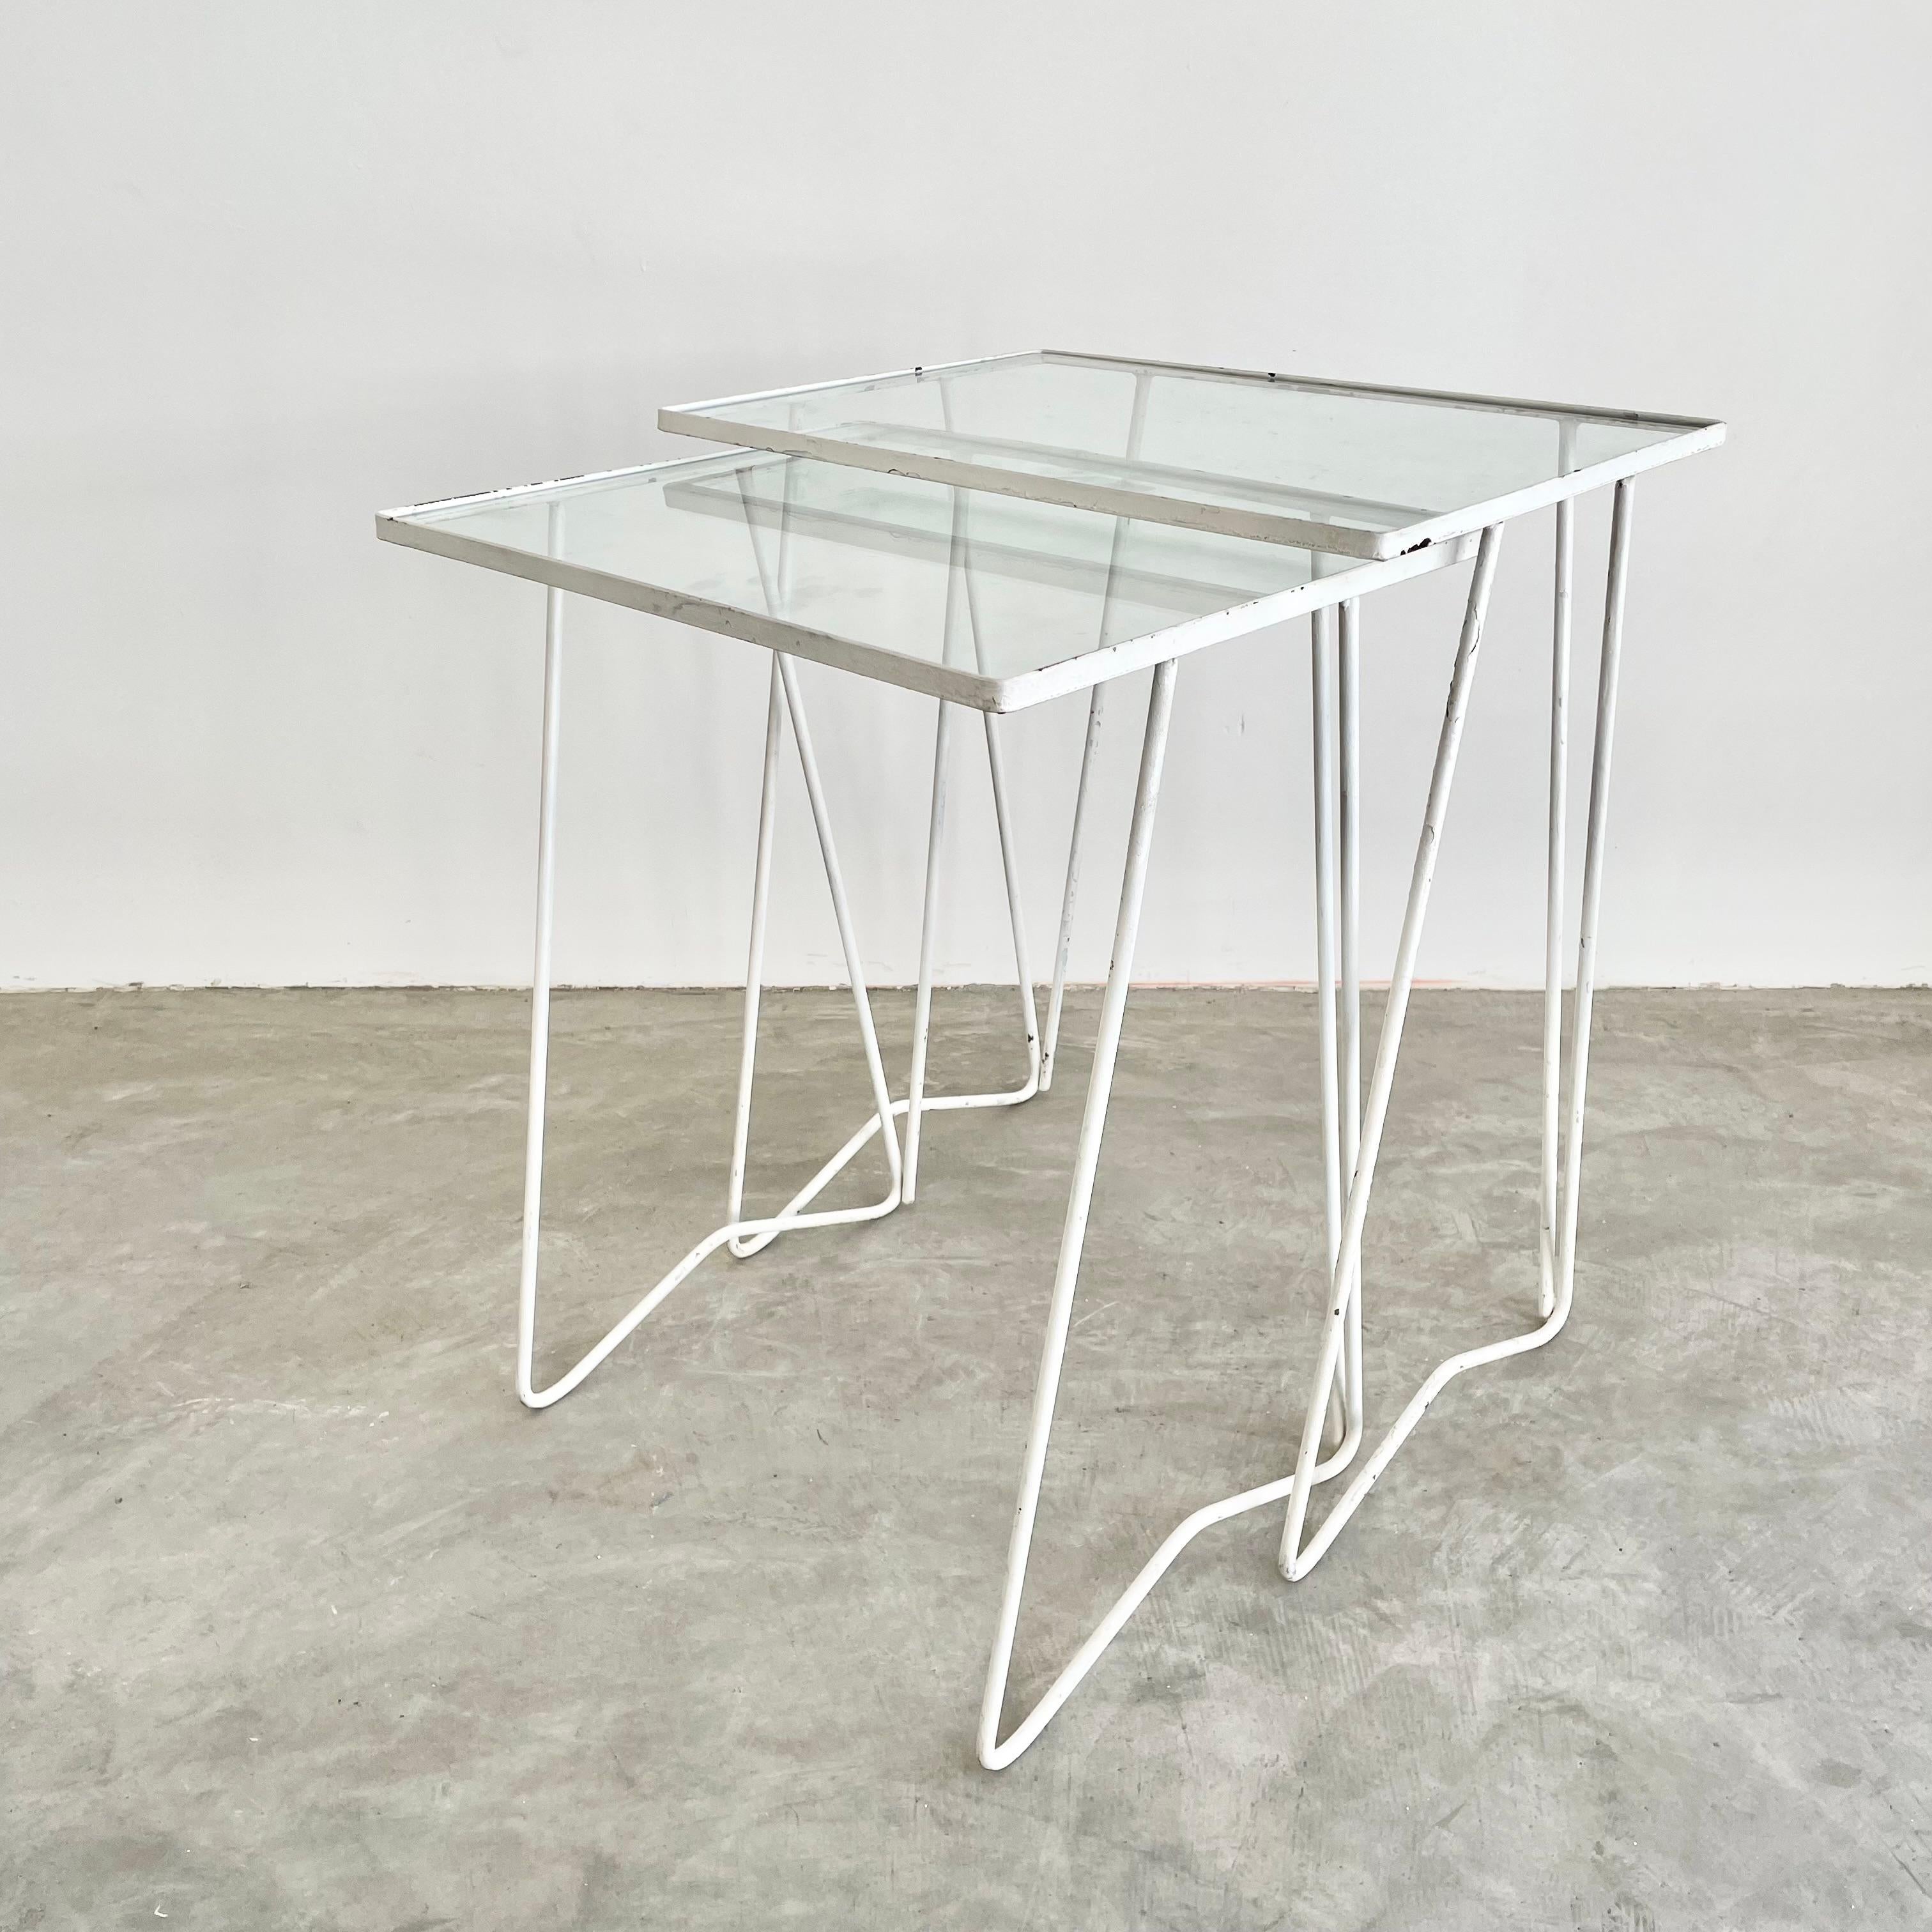 Pair of Iron and Glass Nesting Tables, 1970s USA For Sale 5